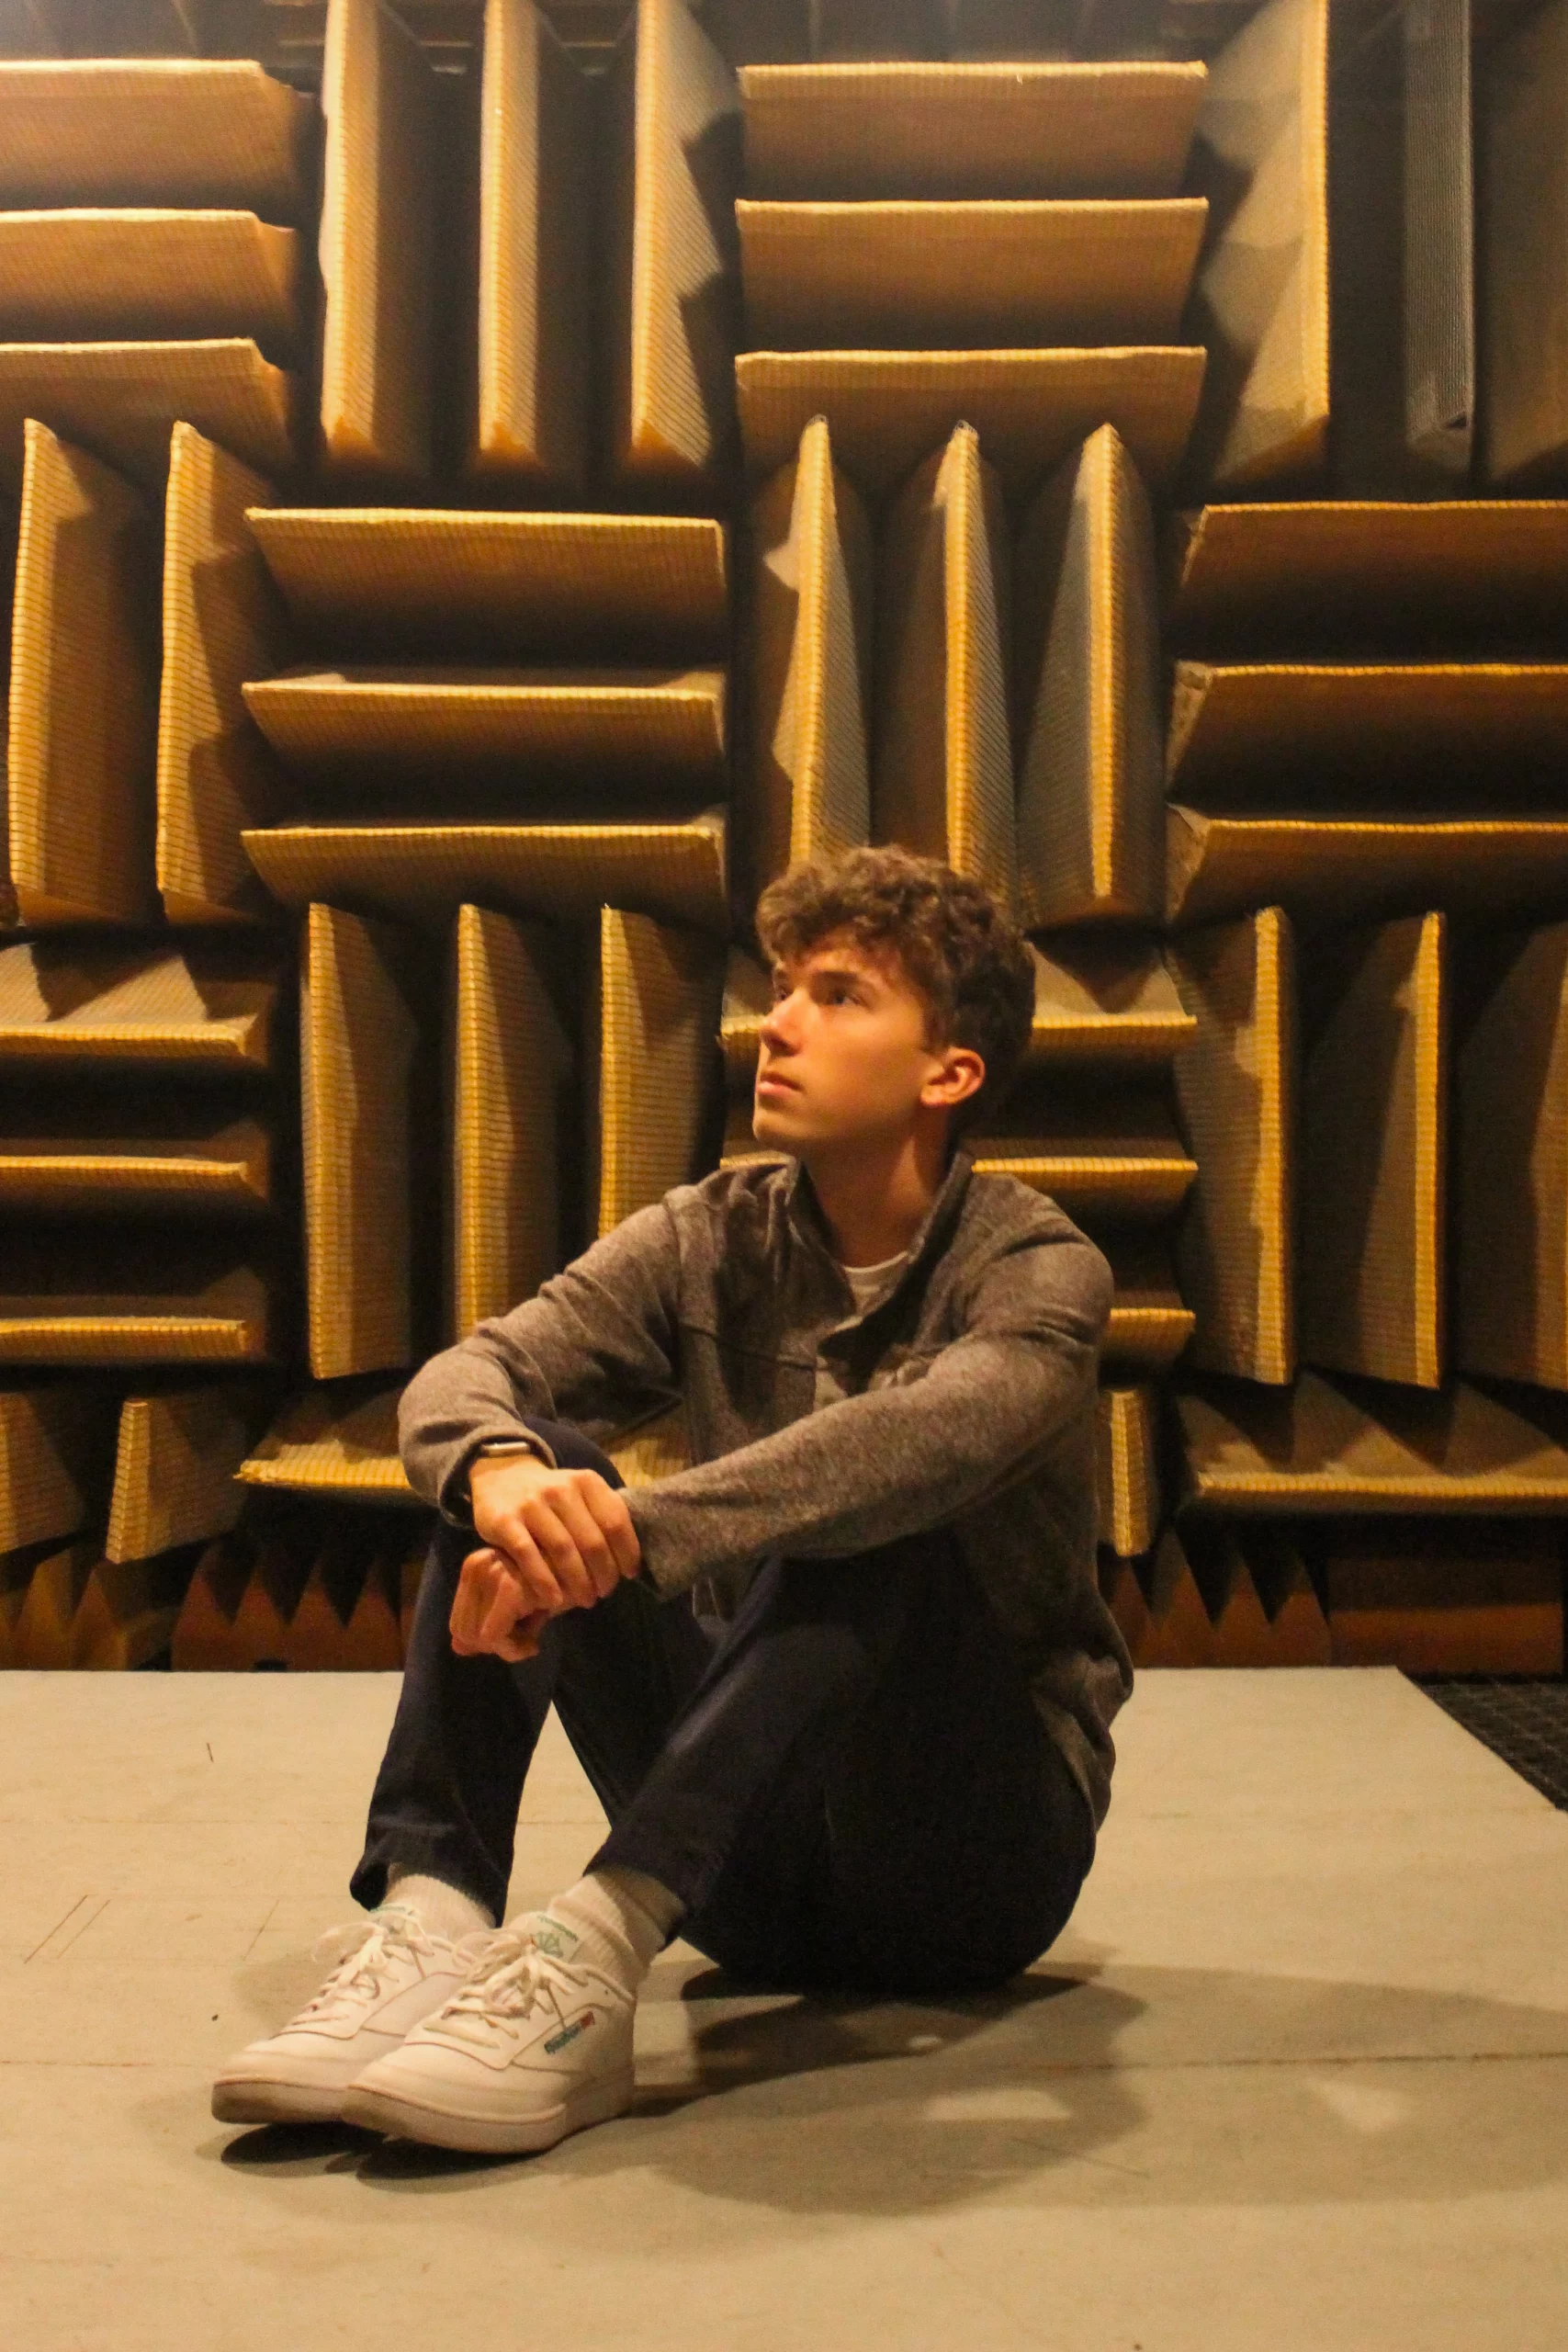 Nate Eisenmann, the author of the article, is sitting on the ground. Behind him, there is a wall lined in soundproofing tiles.